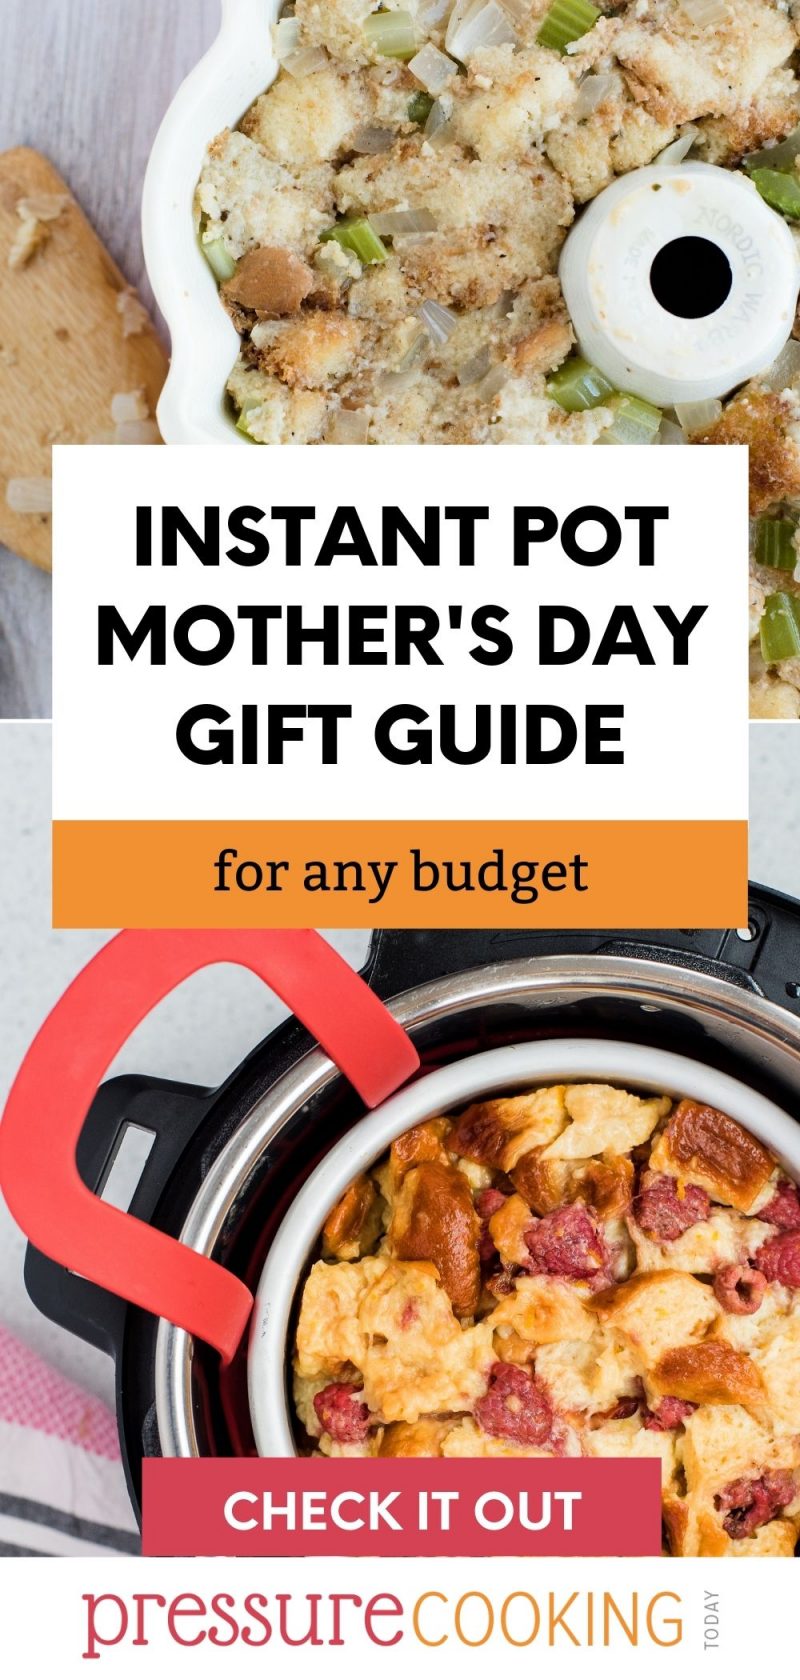 Pinterest Image Reading "Instant Pot Mother's Day Gift Guide" overlaid on a photo of a bundt pan and a cake pan with an Oxo sling